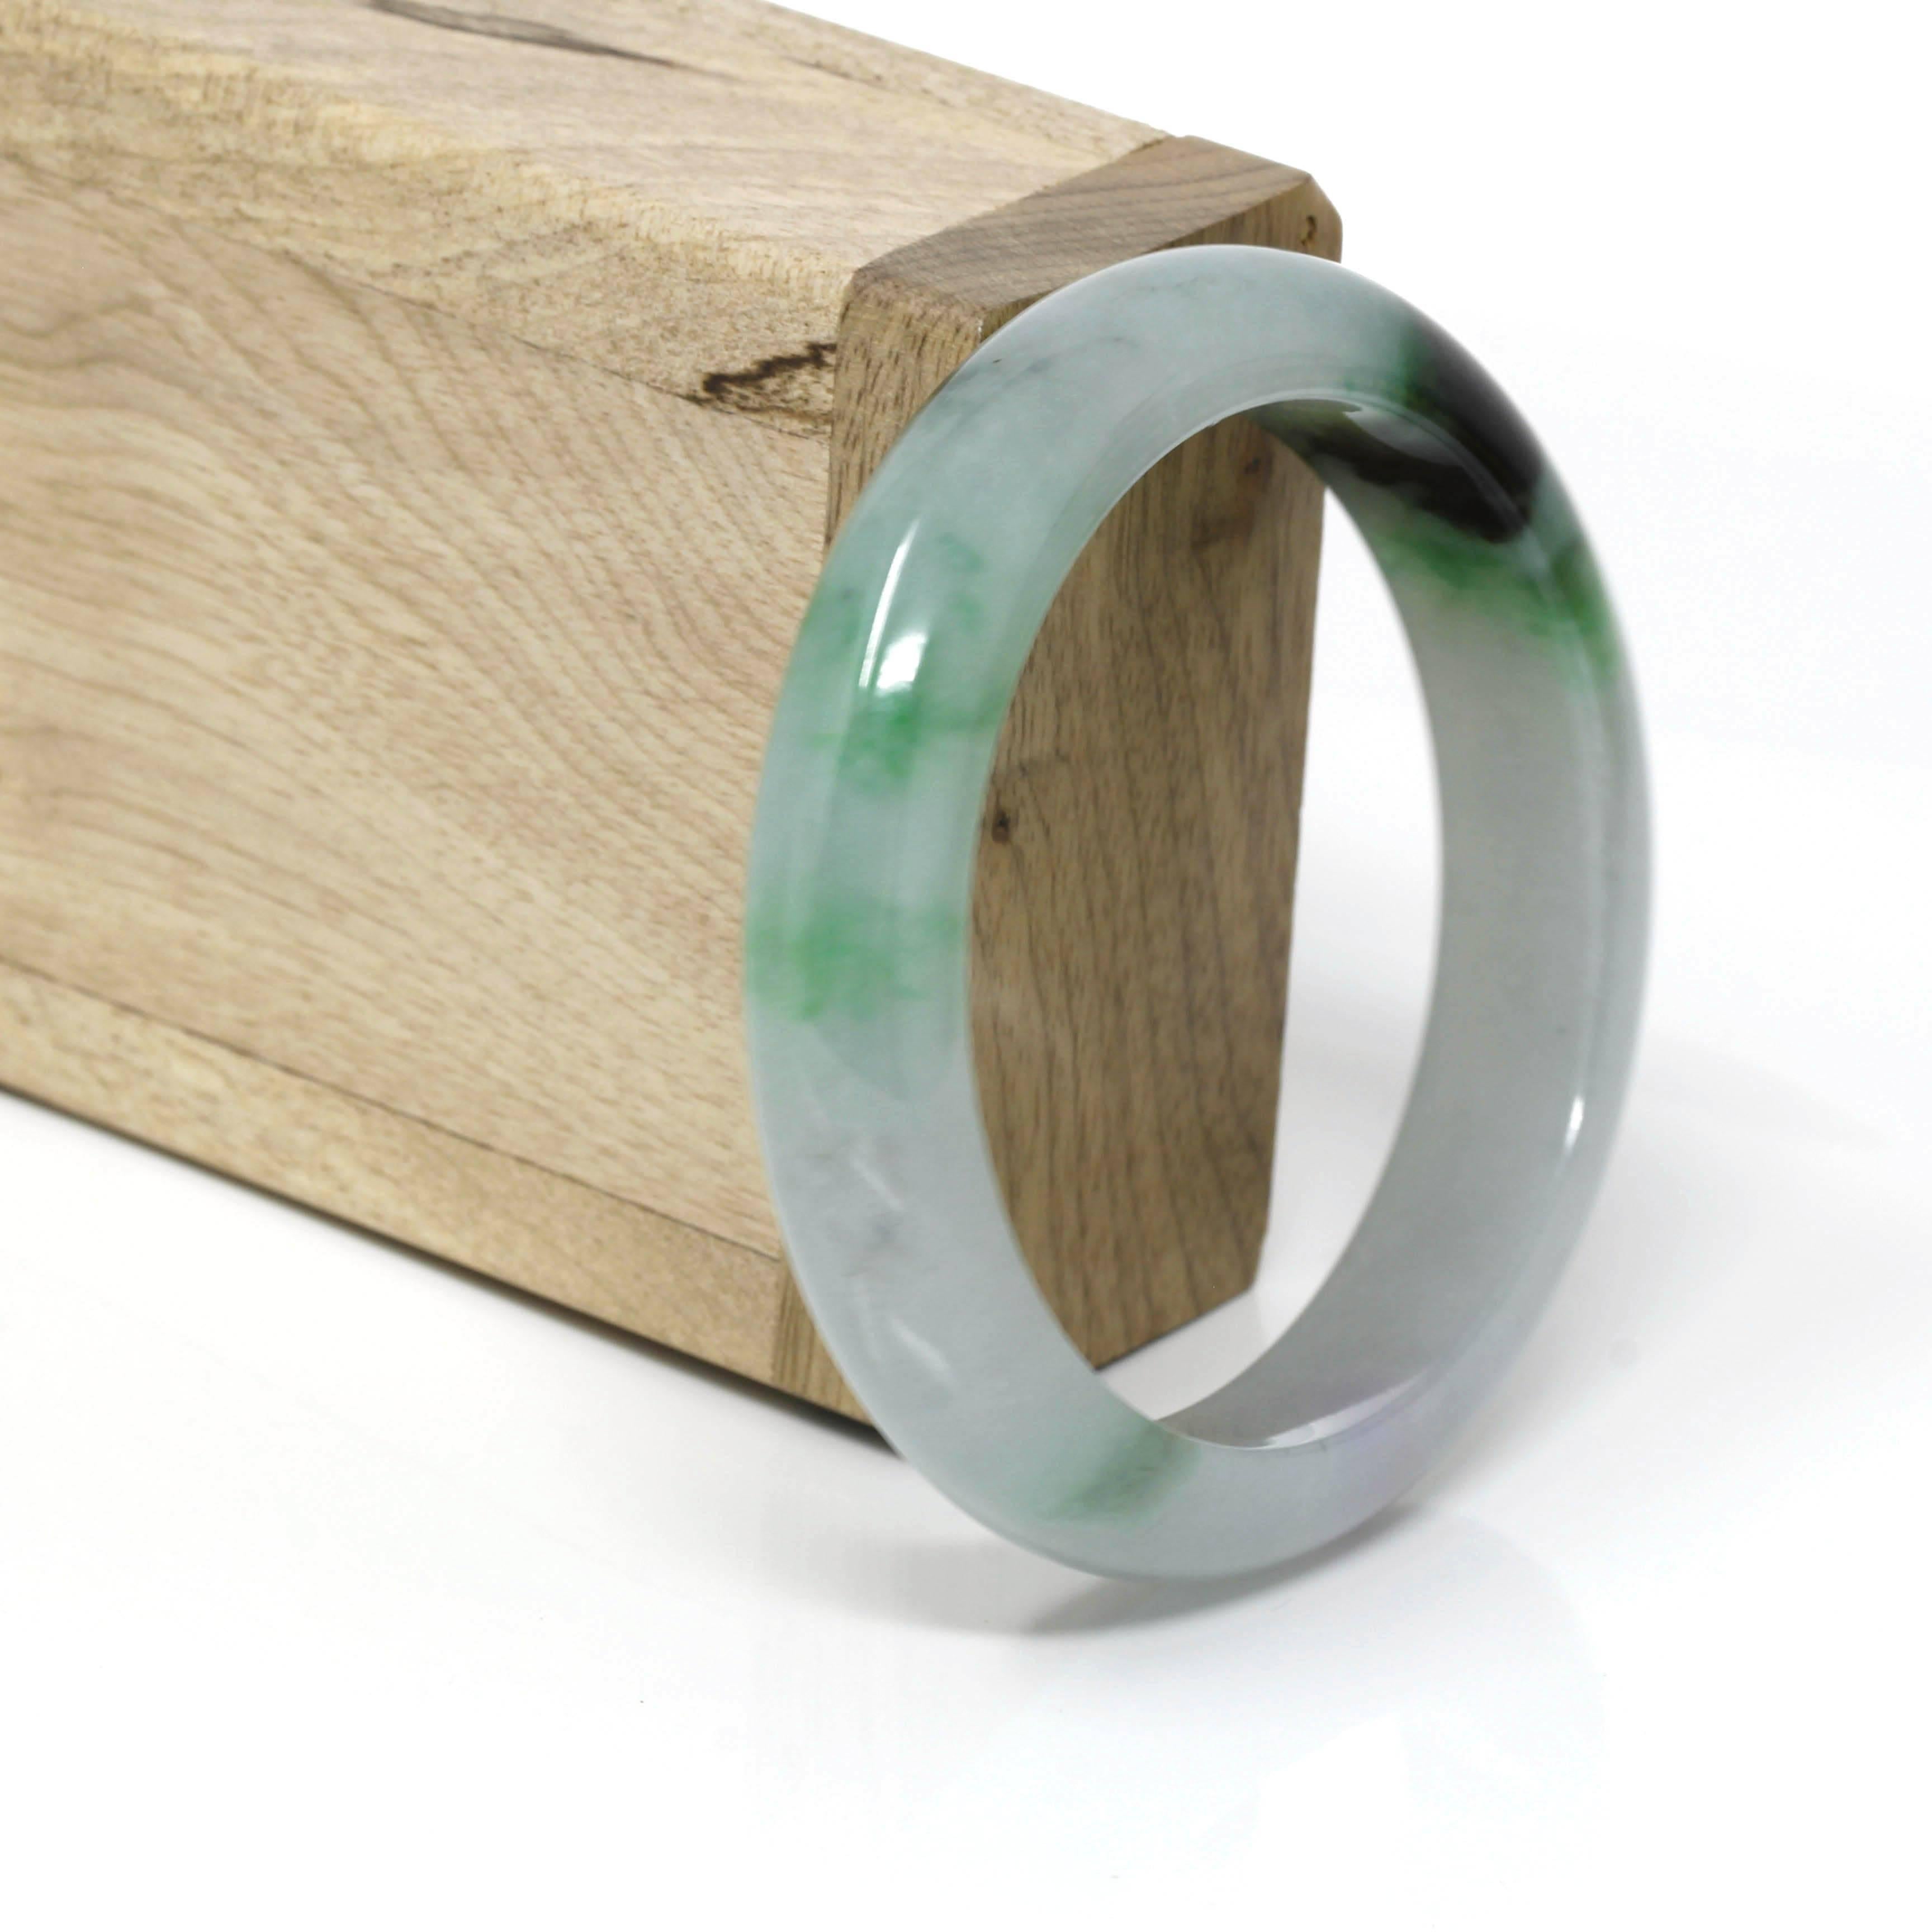 *Details-- Genuine Burmese Jadeite Jade Bangle Bracelet. This bangle is made with very high-quality genuine Burmese Jadeite jade. The jade texture is very smooth and translucent with dark green and apple green patches of colors. This whole bangle is